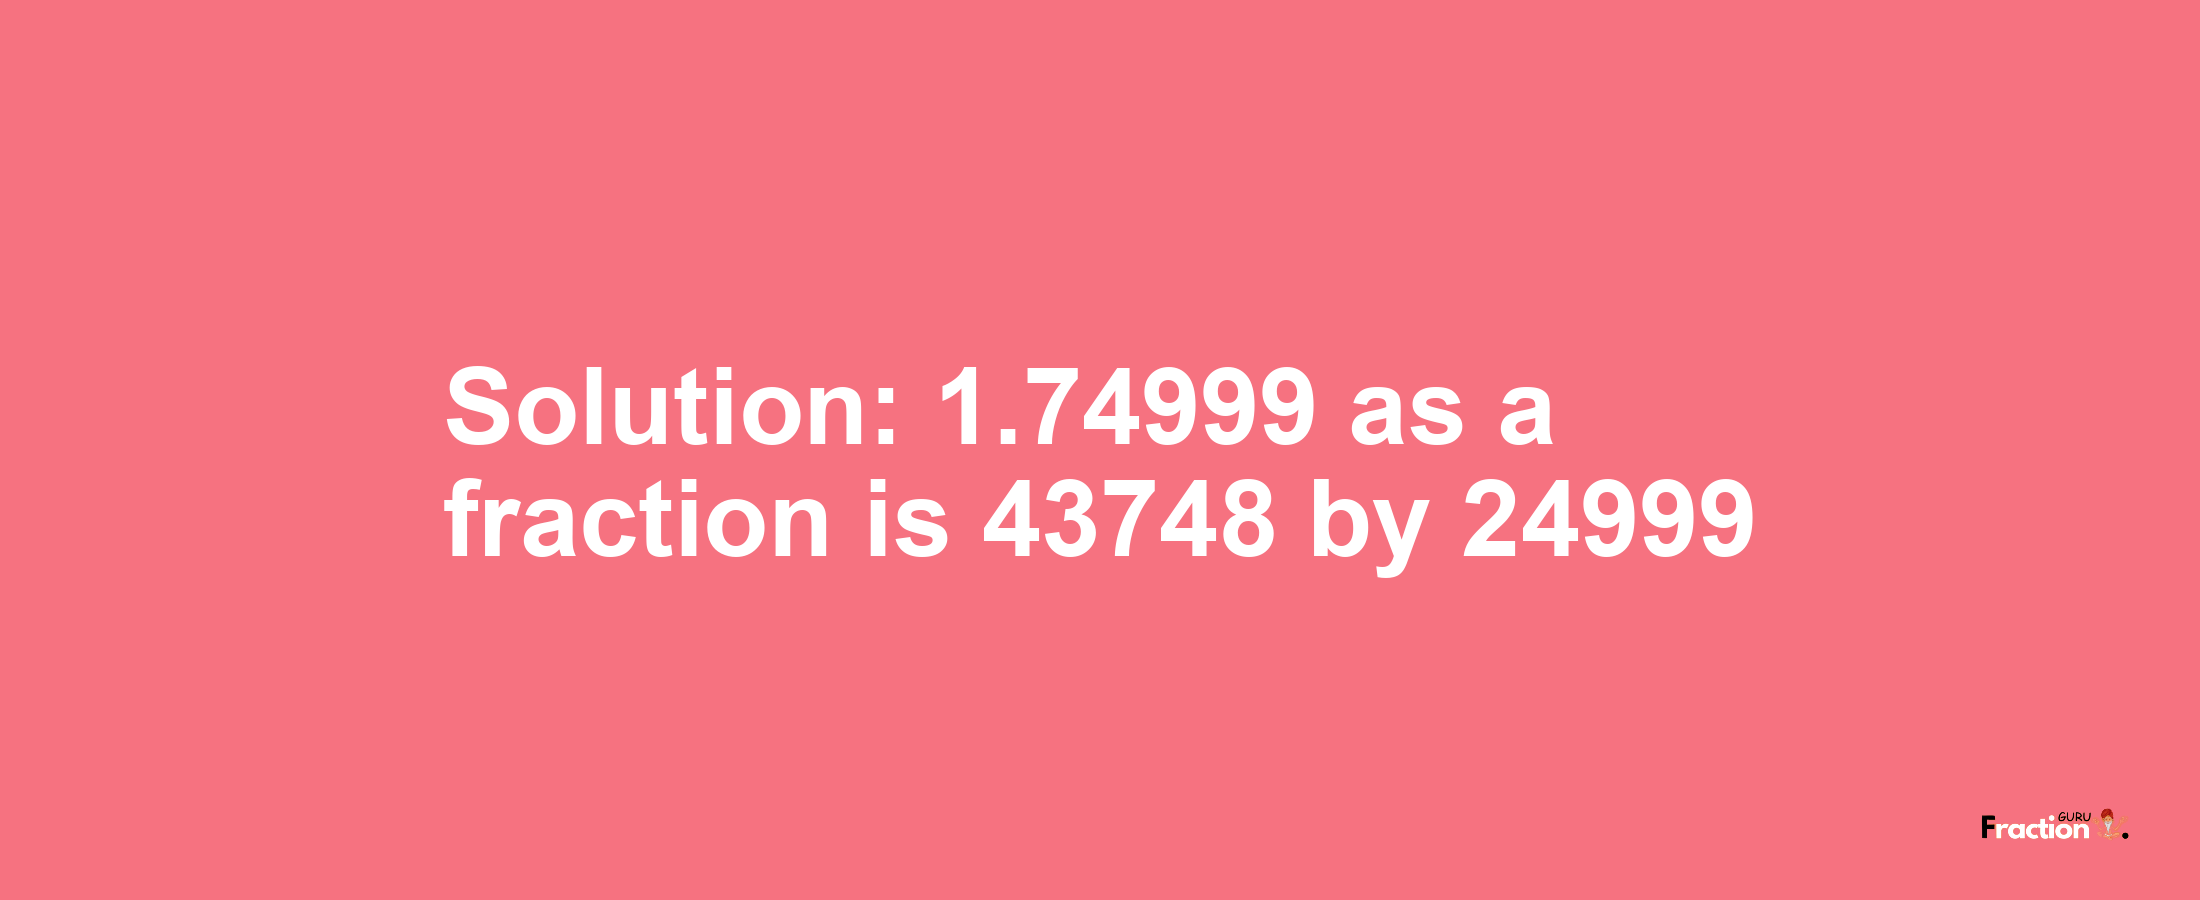 Solution:1.74999 as a fraction is 43748/24999